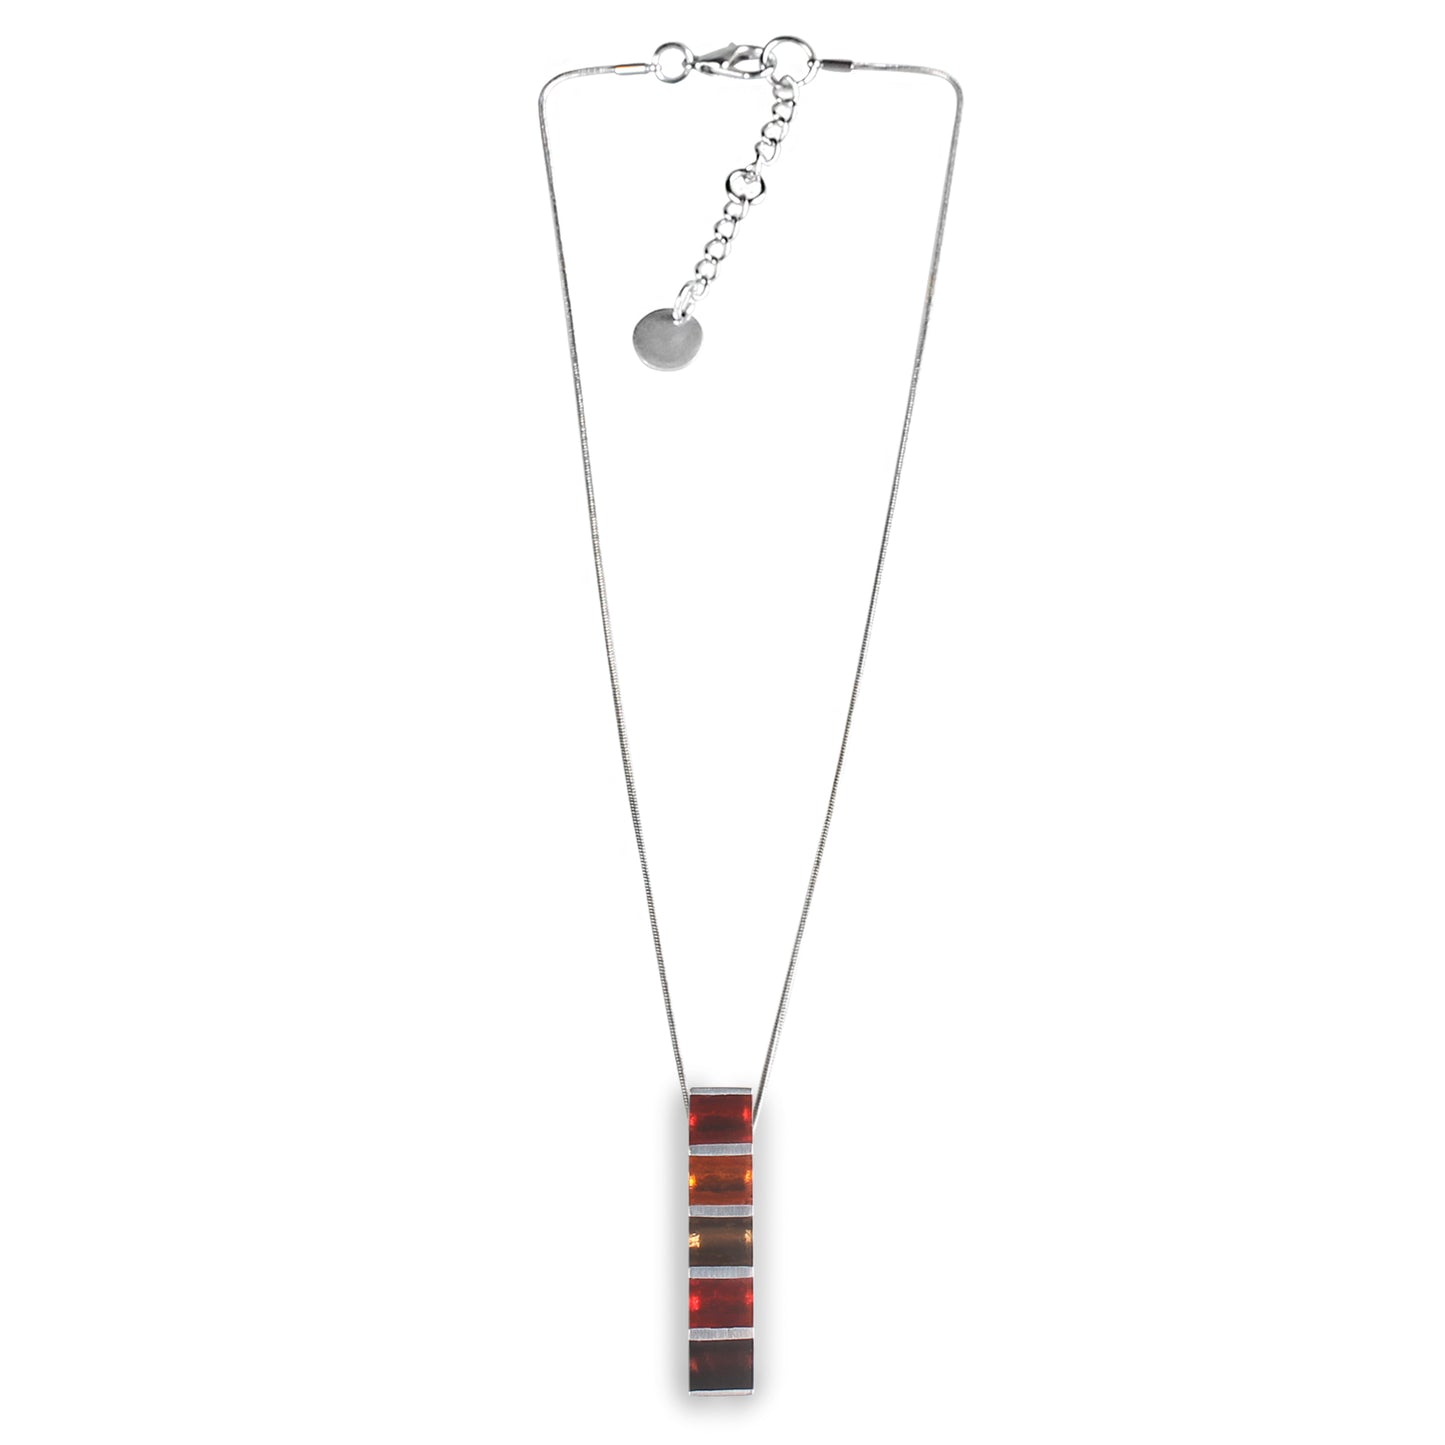 Chilli Pewter Stripes Pendant on Chain